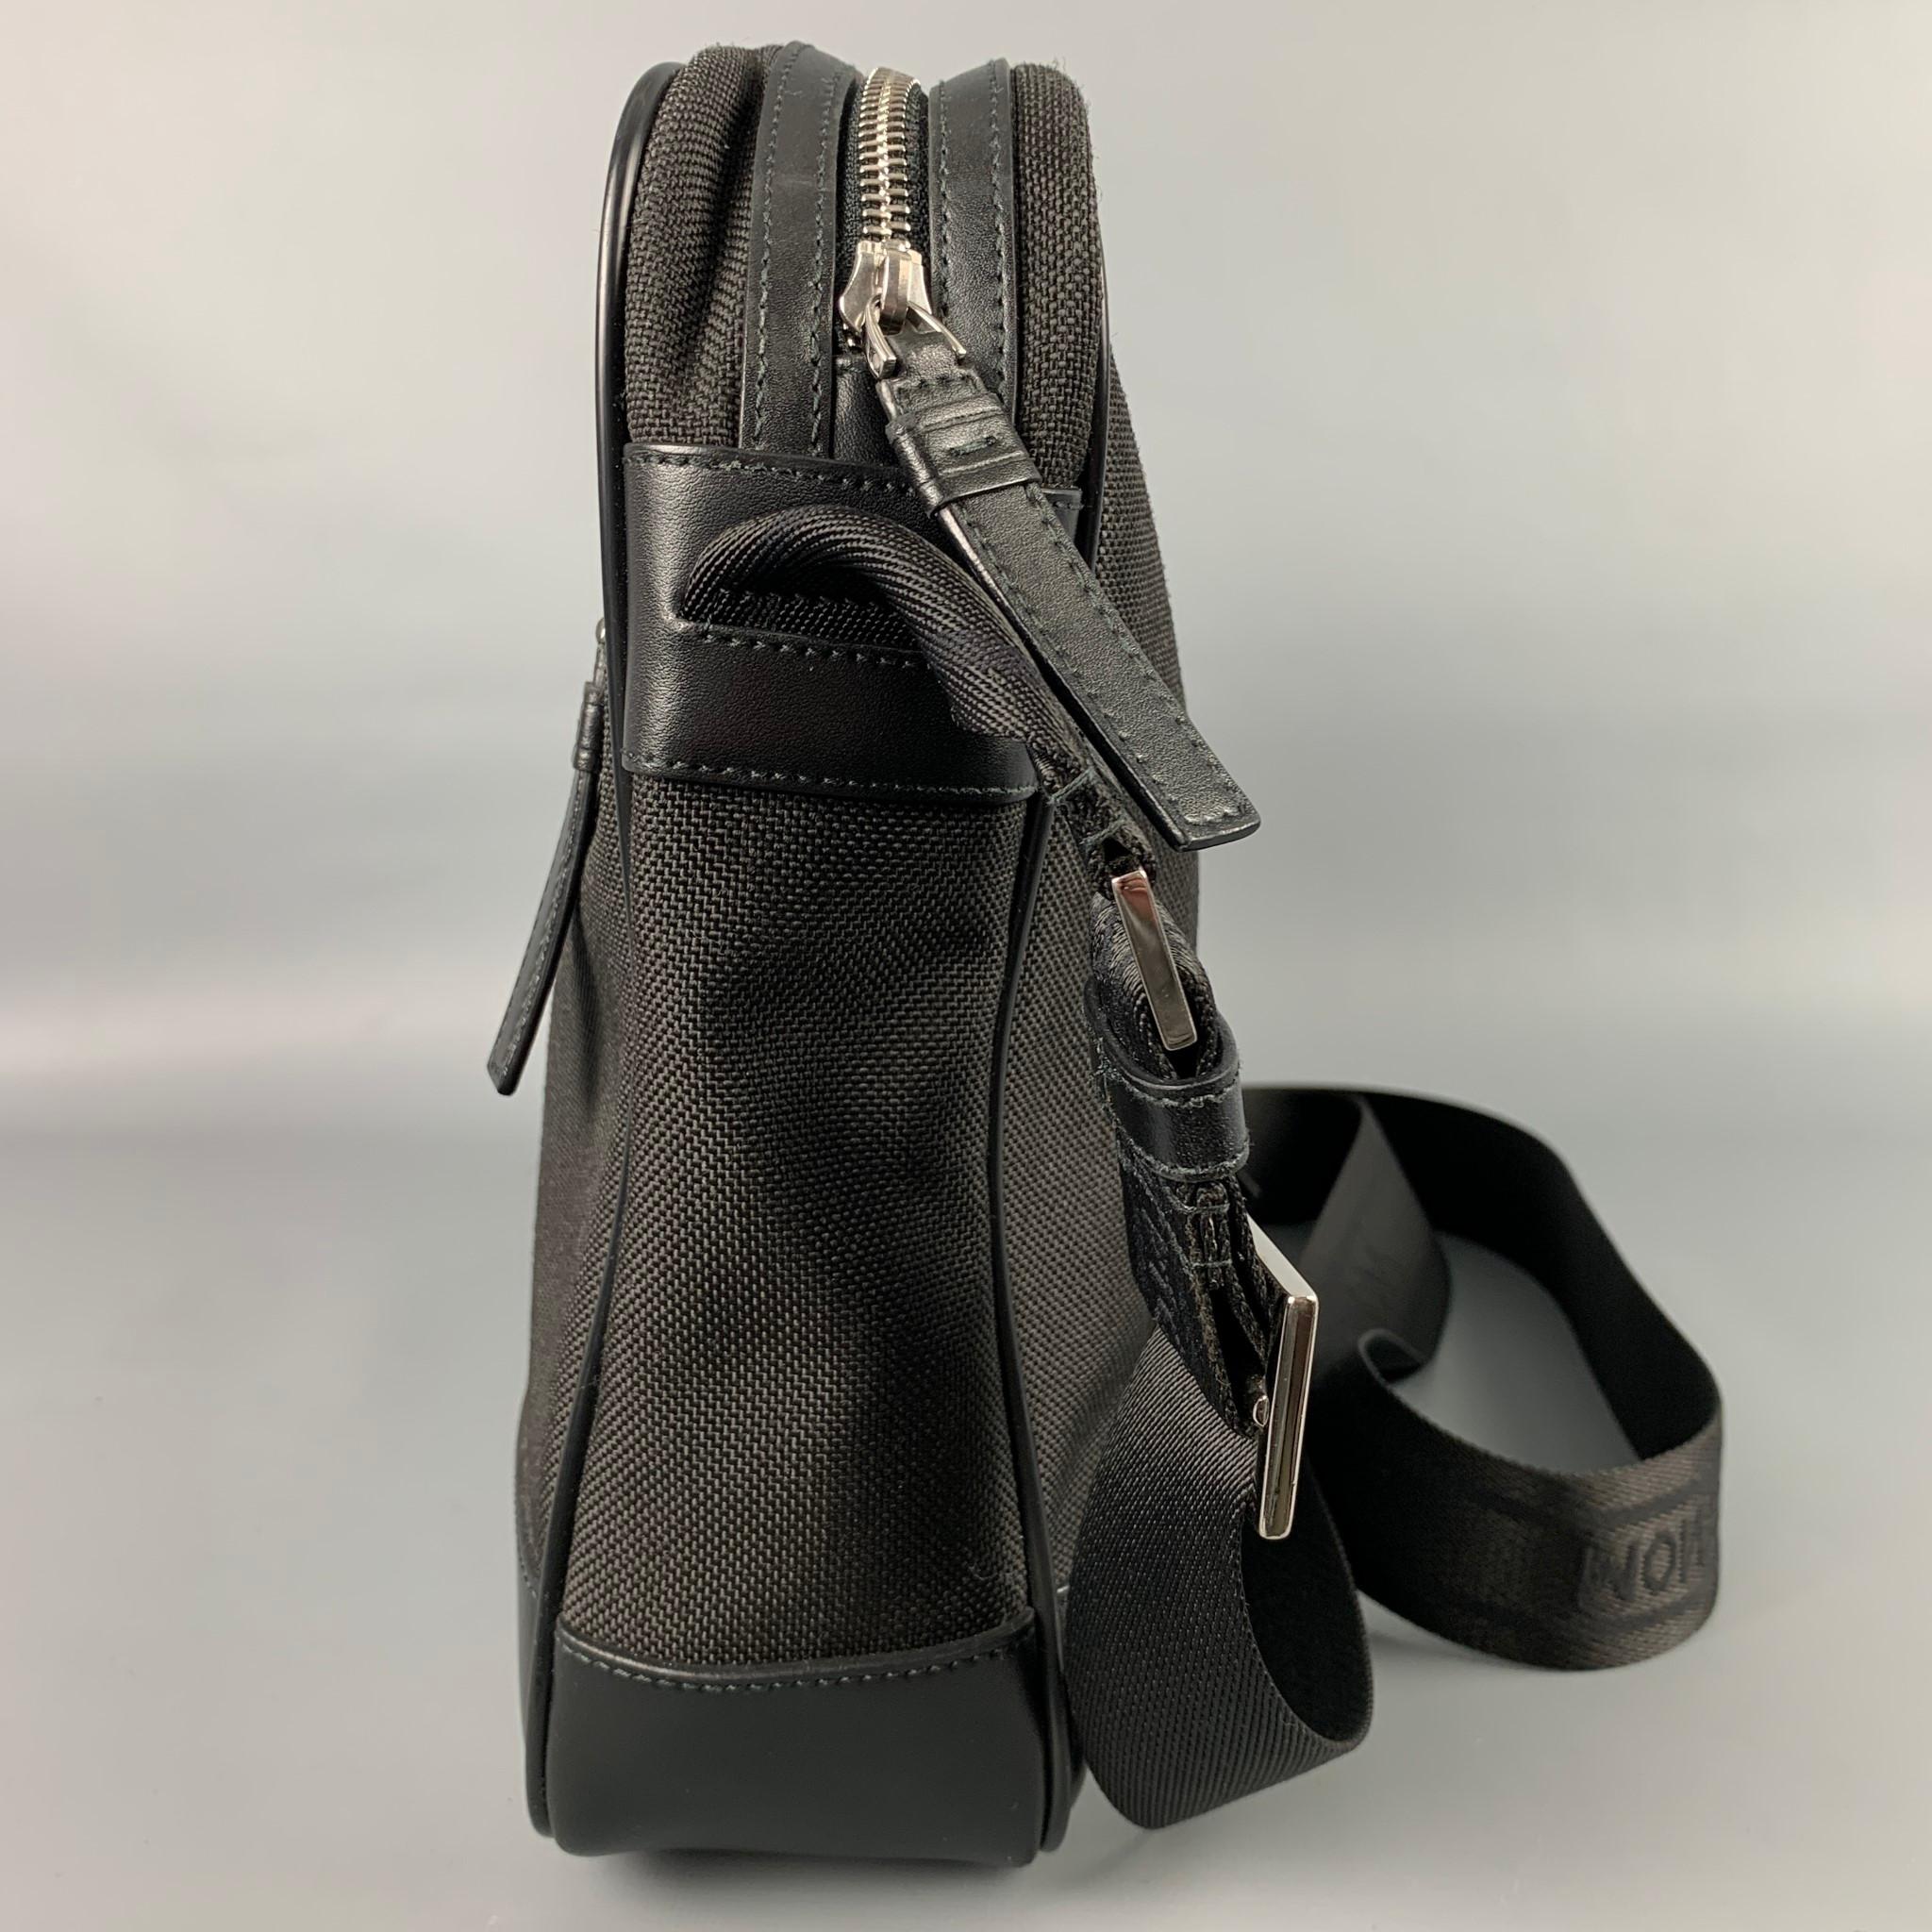 MONT BLANC briefcase comes in a black canvas with a leather trim, silver tone hardware, shoulder strap, front zipper pocket, inner slots, ad a zipper closure. Made in Italy.  

Very Good Pre-Owned Condition.

Measurements:

Length: 13.5 in.
Width: 3